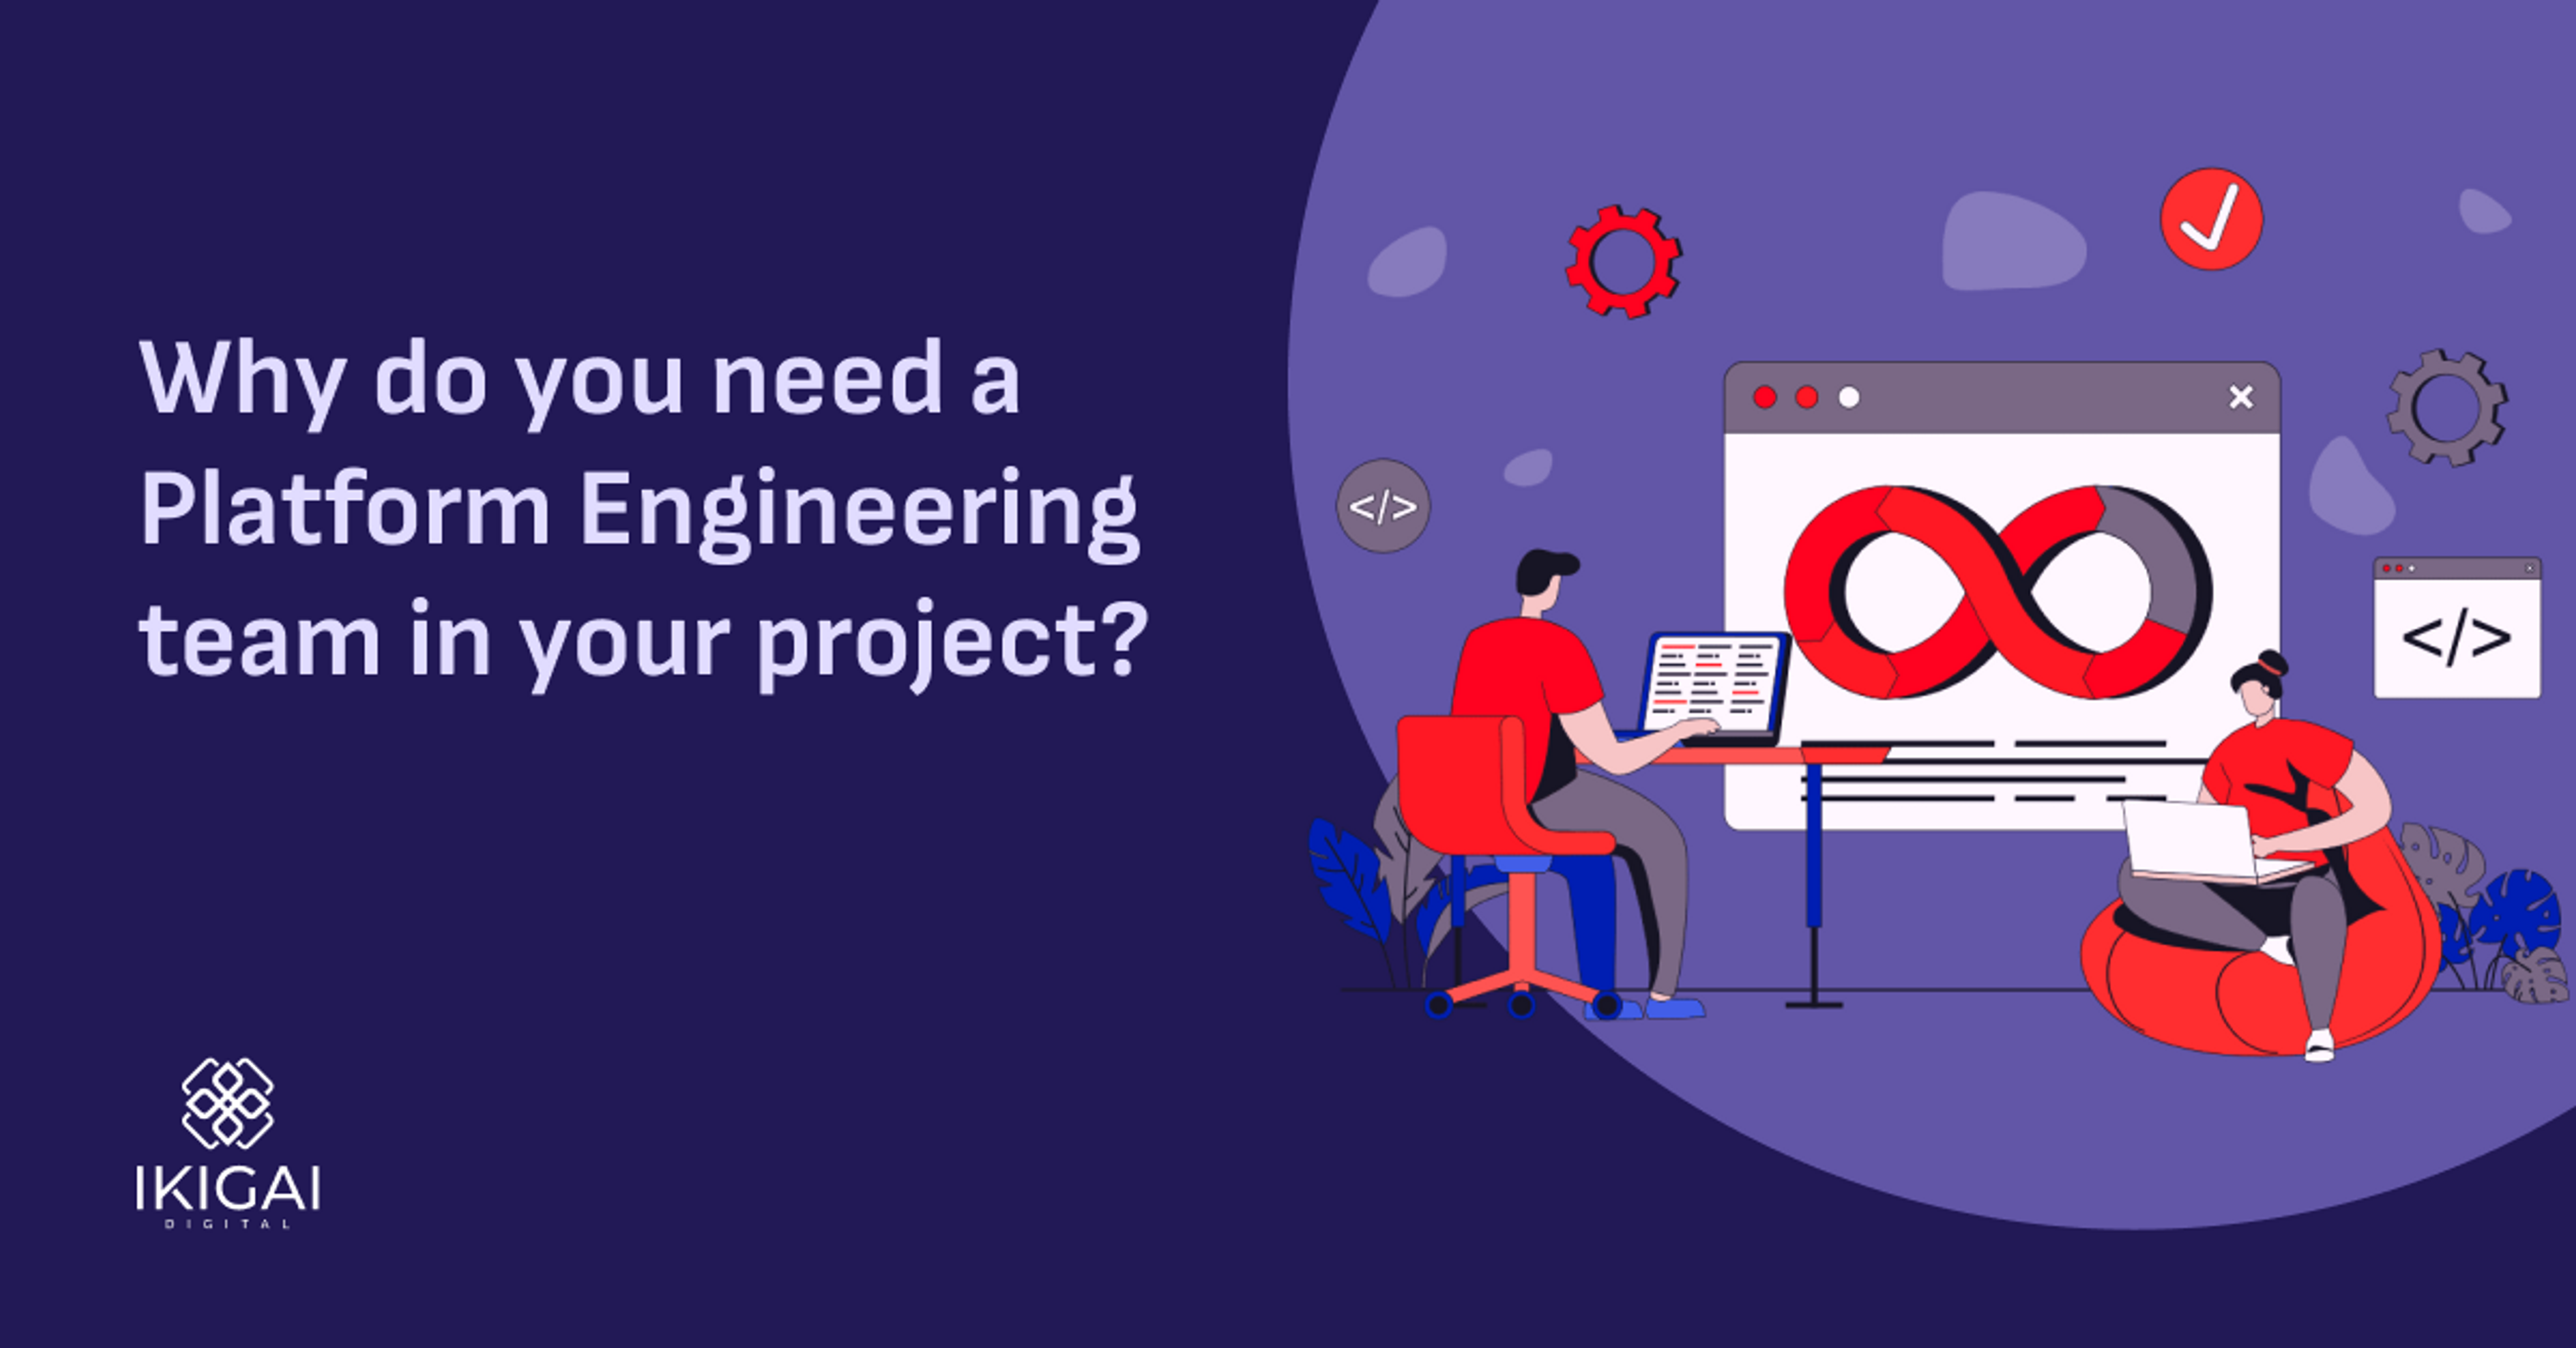 Why do you need a Platform Engineering team in your project?